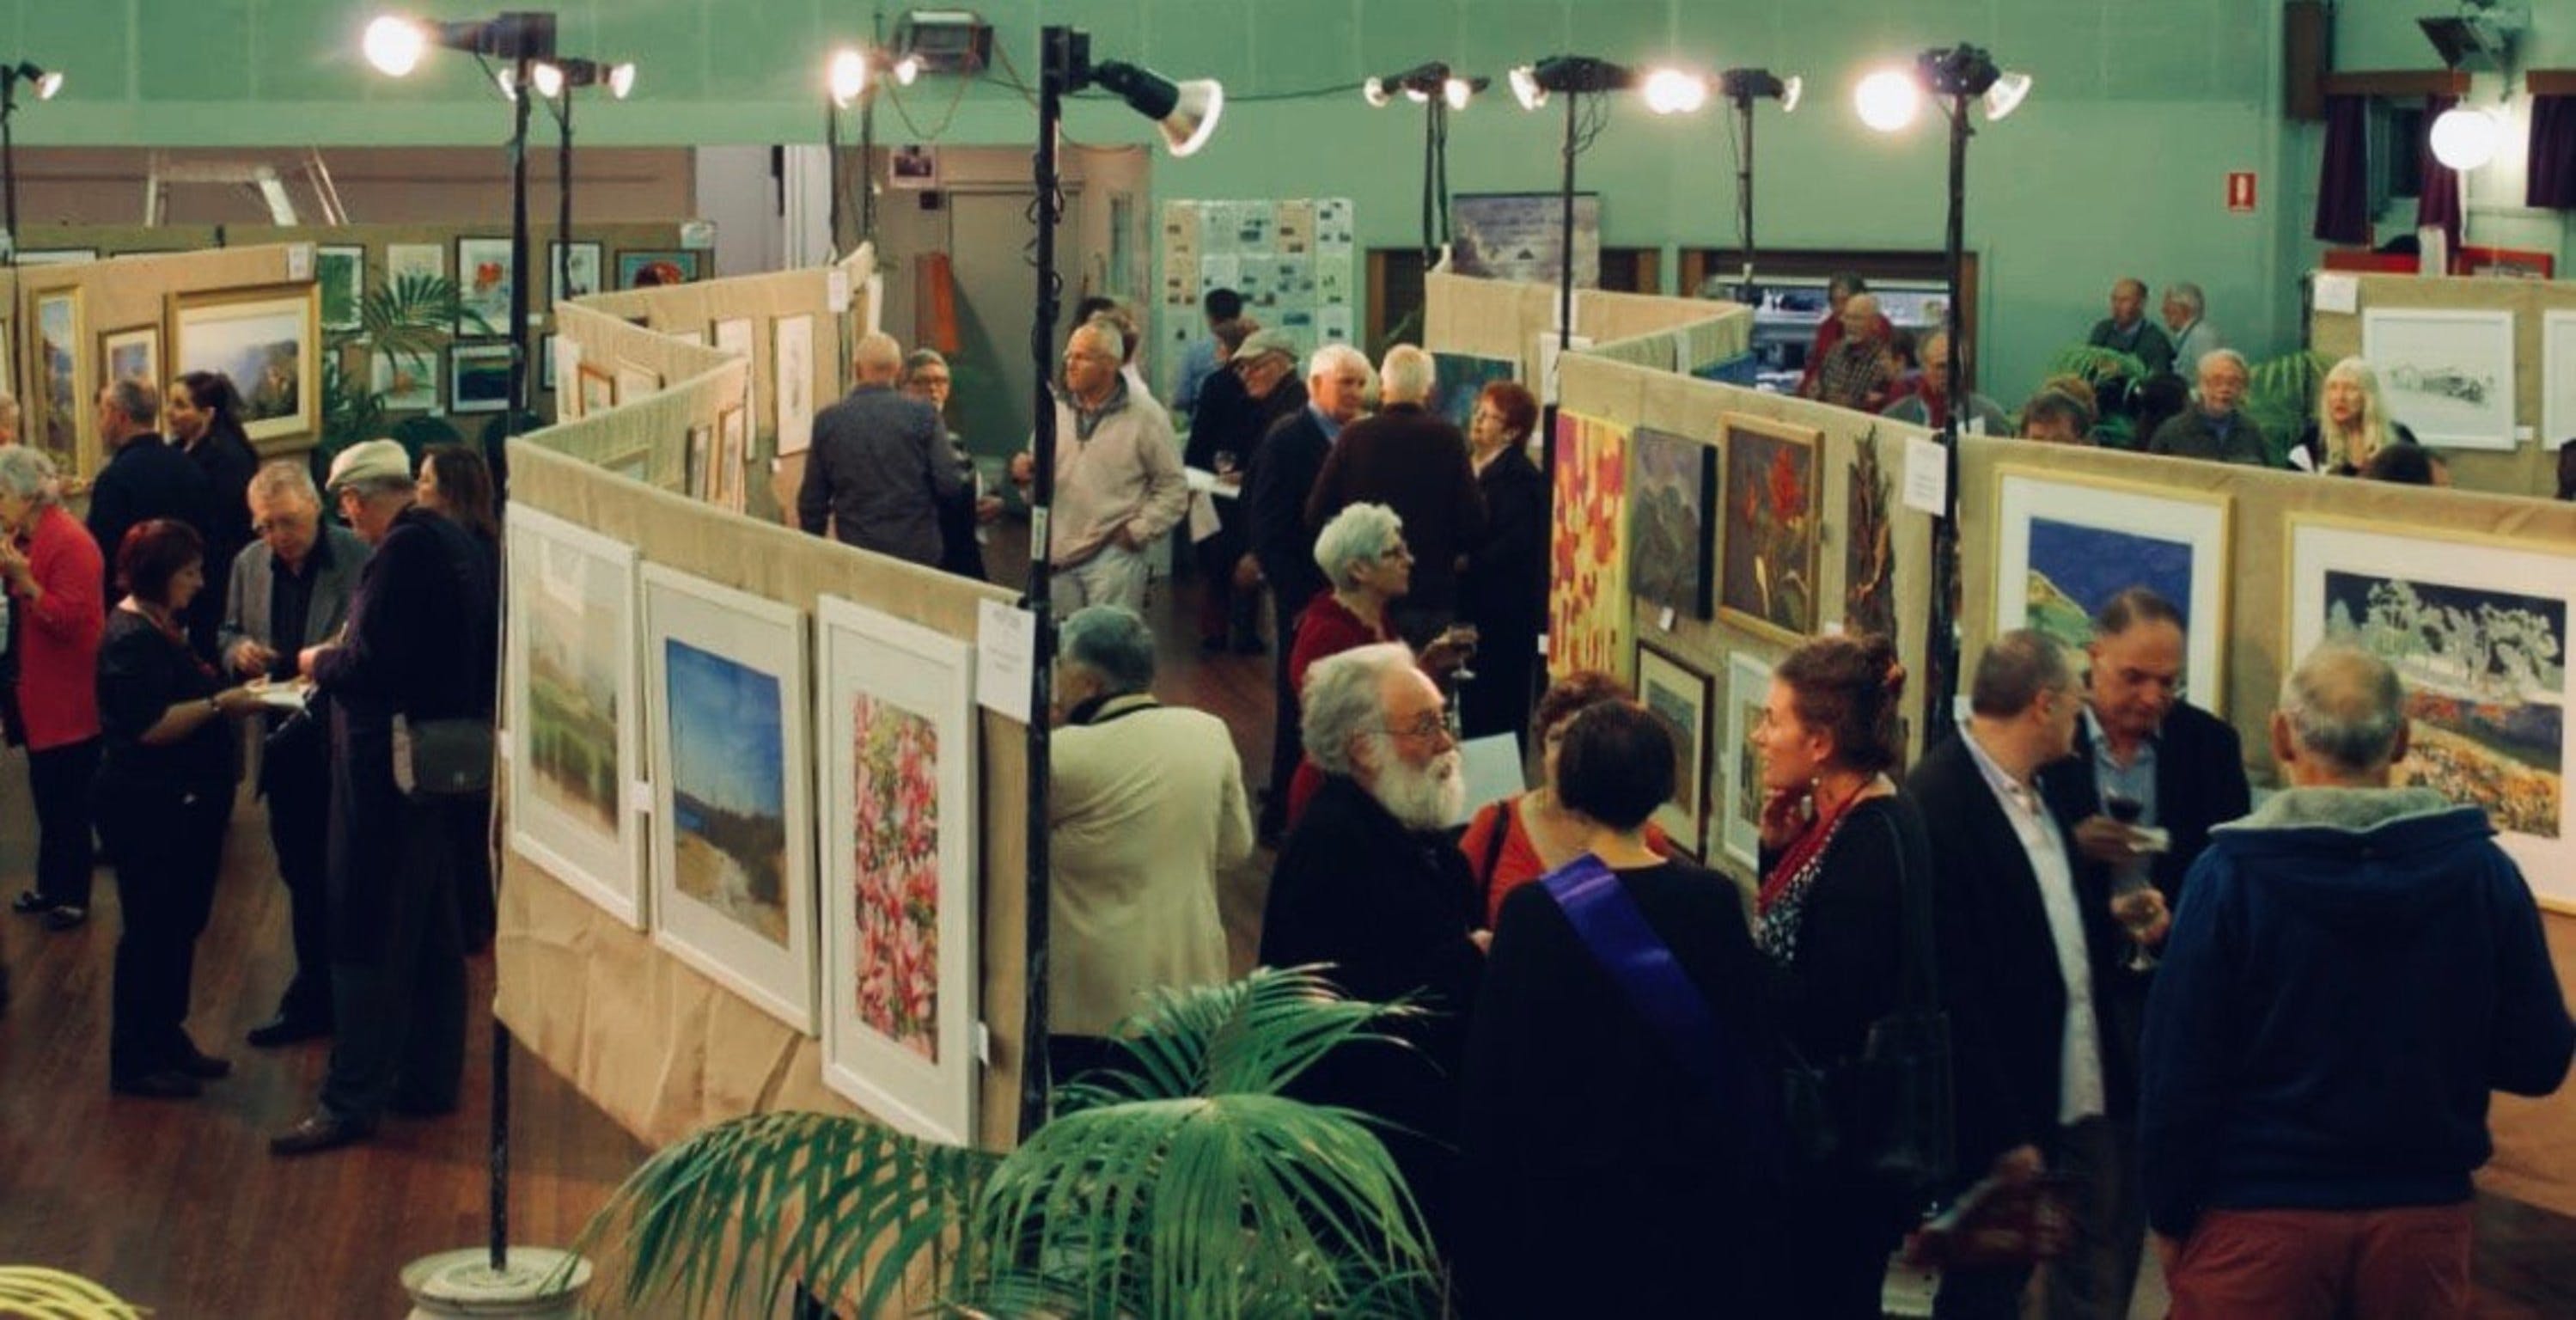 Blackheath Rhododendron Art Show - Pubs and Clubs